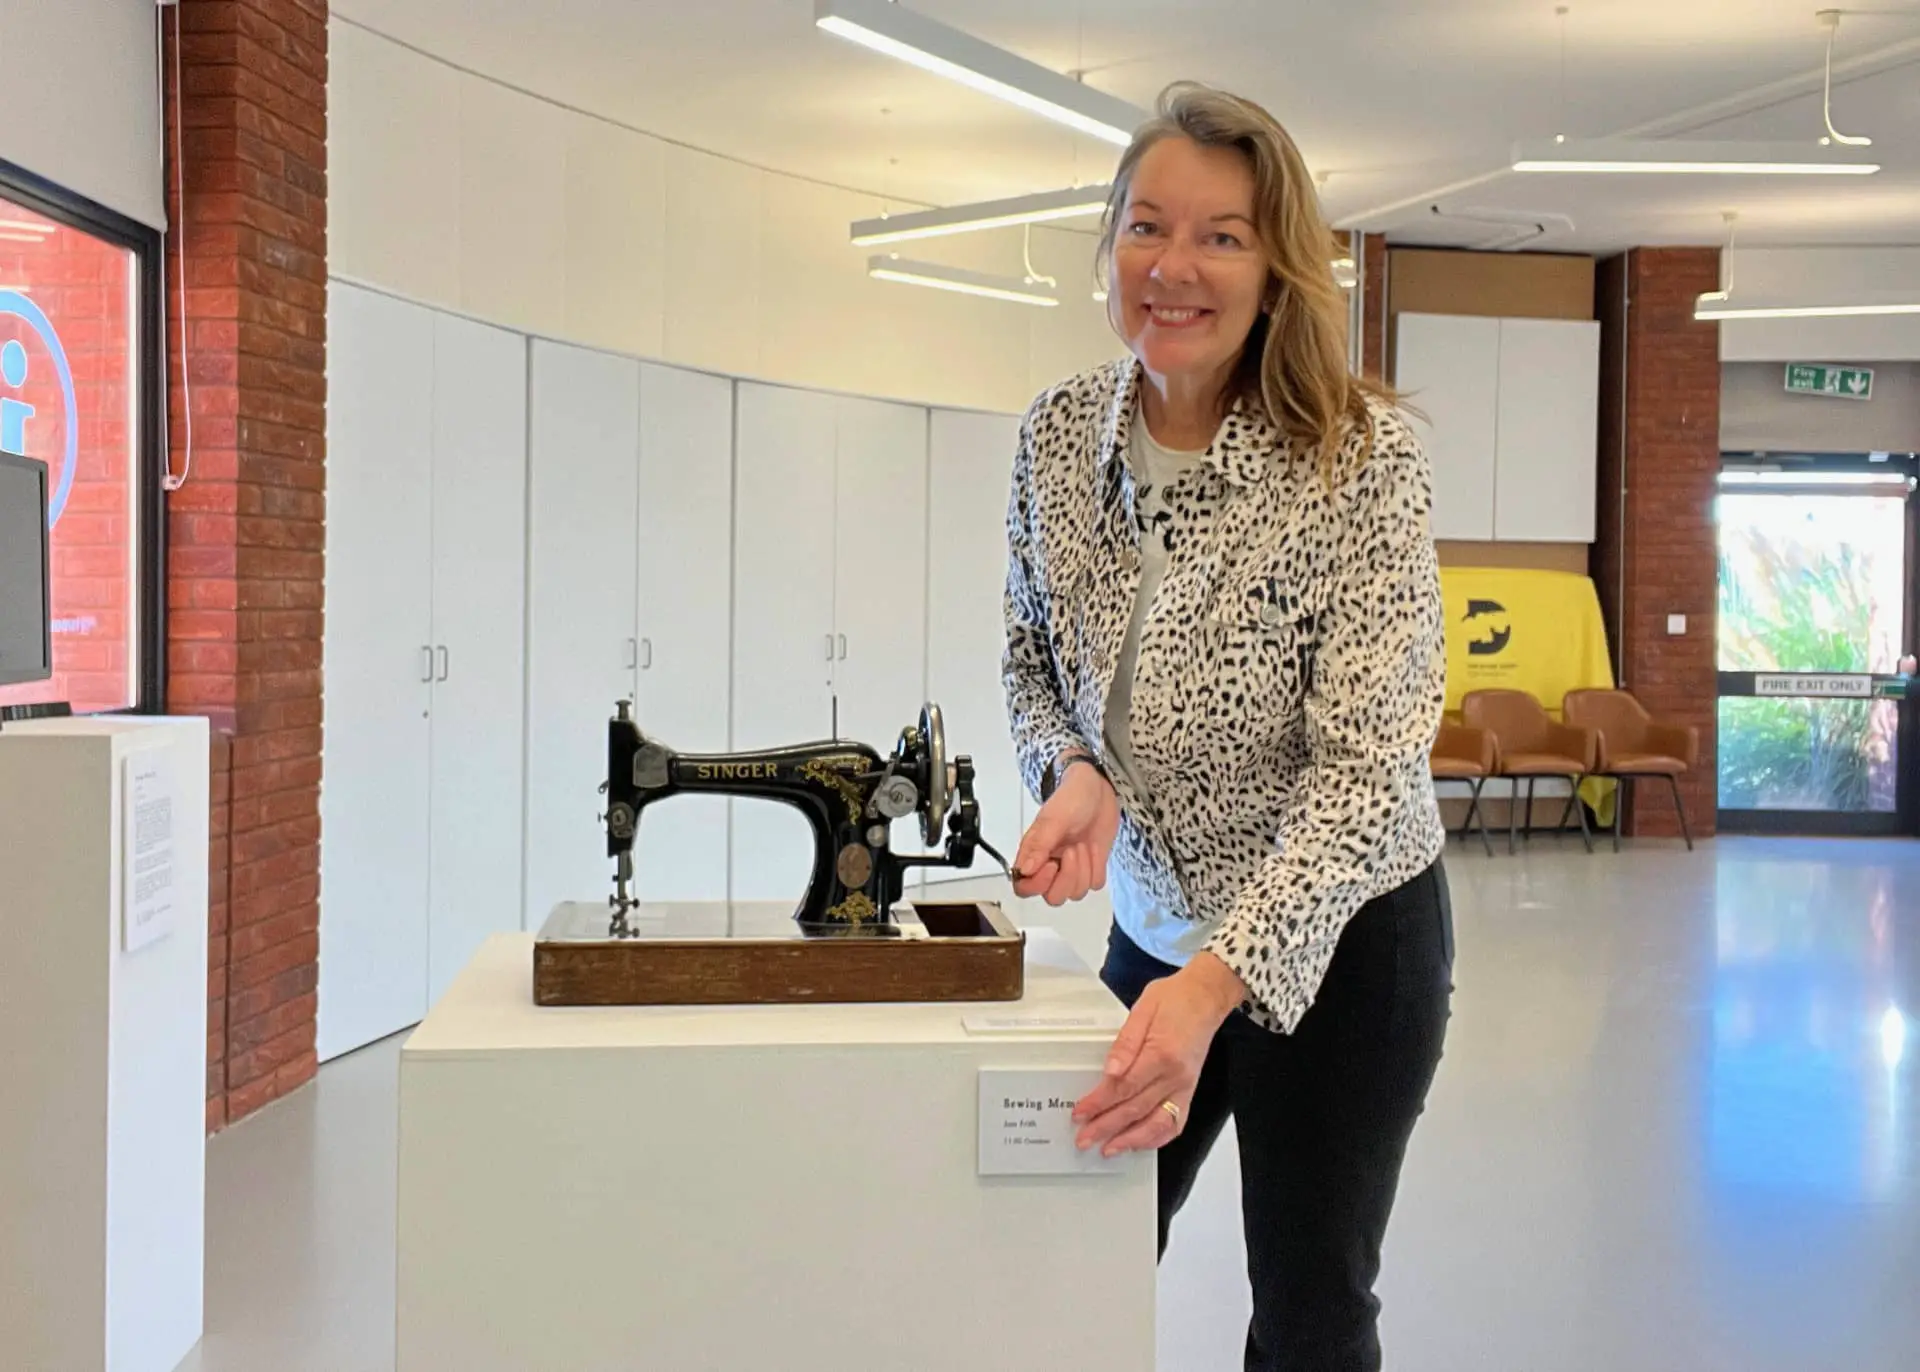 Jan Frith with her Sewing Machine on display